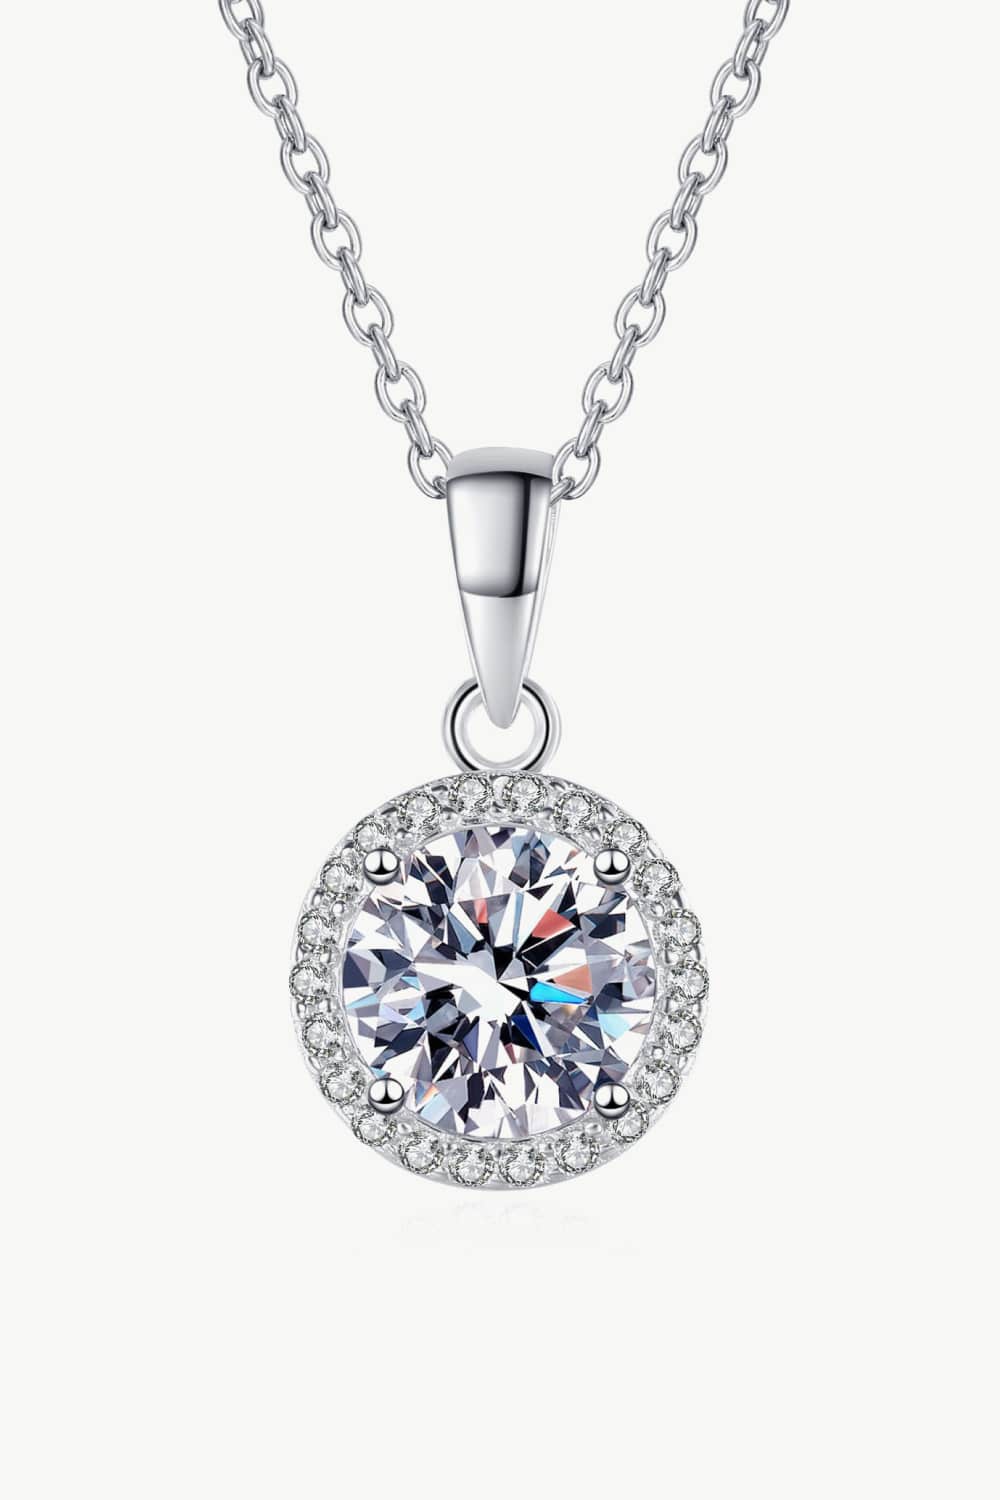 Chance to Charm 1 Carat Moissanite Round Pendant Necklace